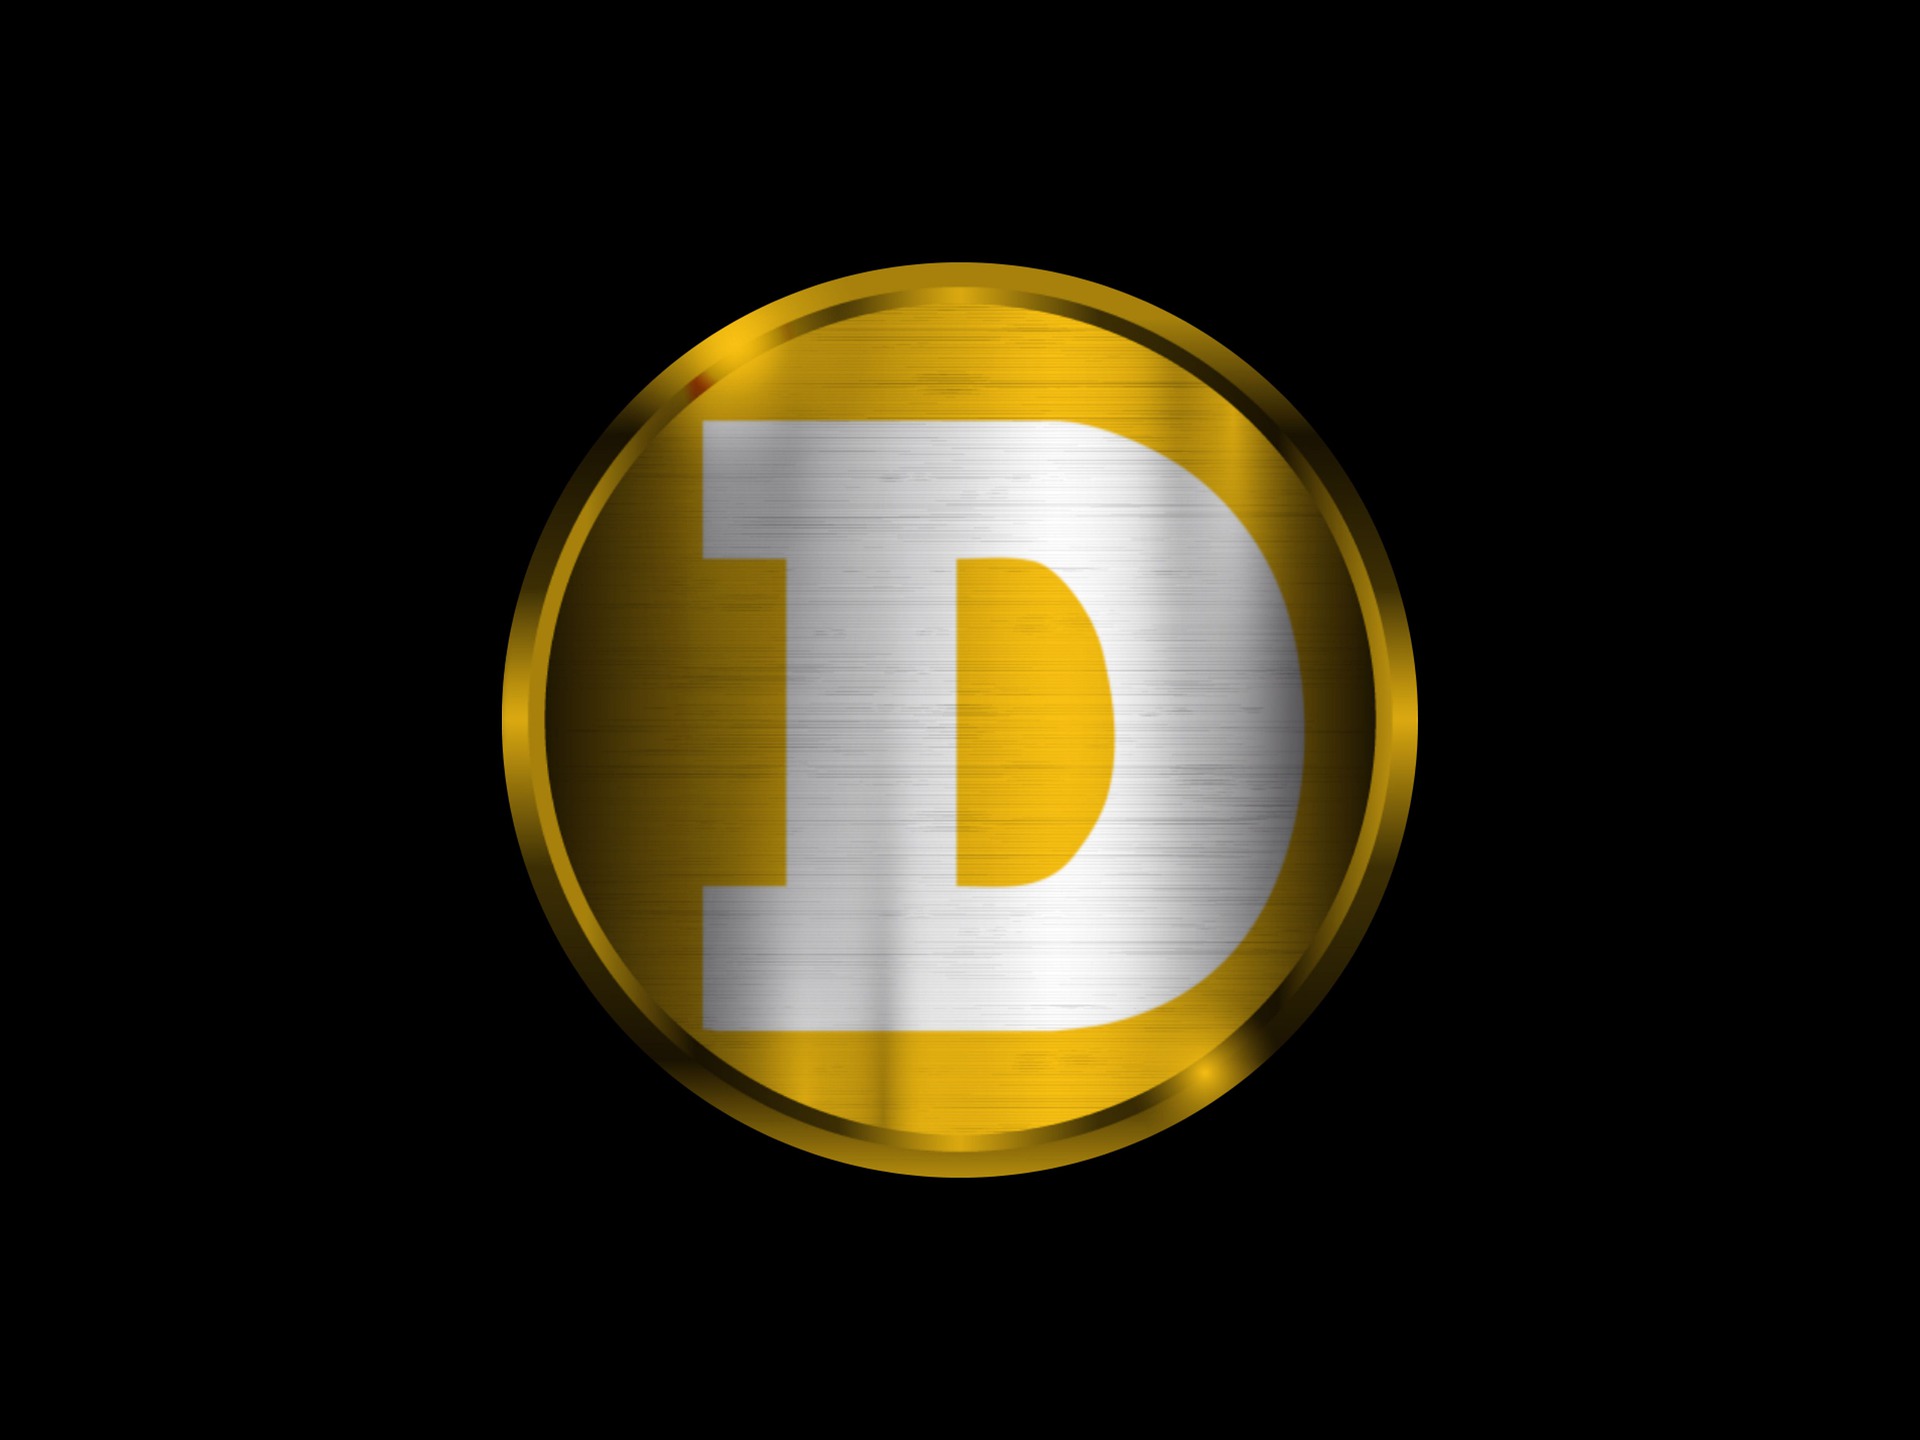 Dogecoin Price Prediction: DOGE Could Present Excellent Buy Opportunity